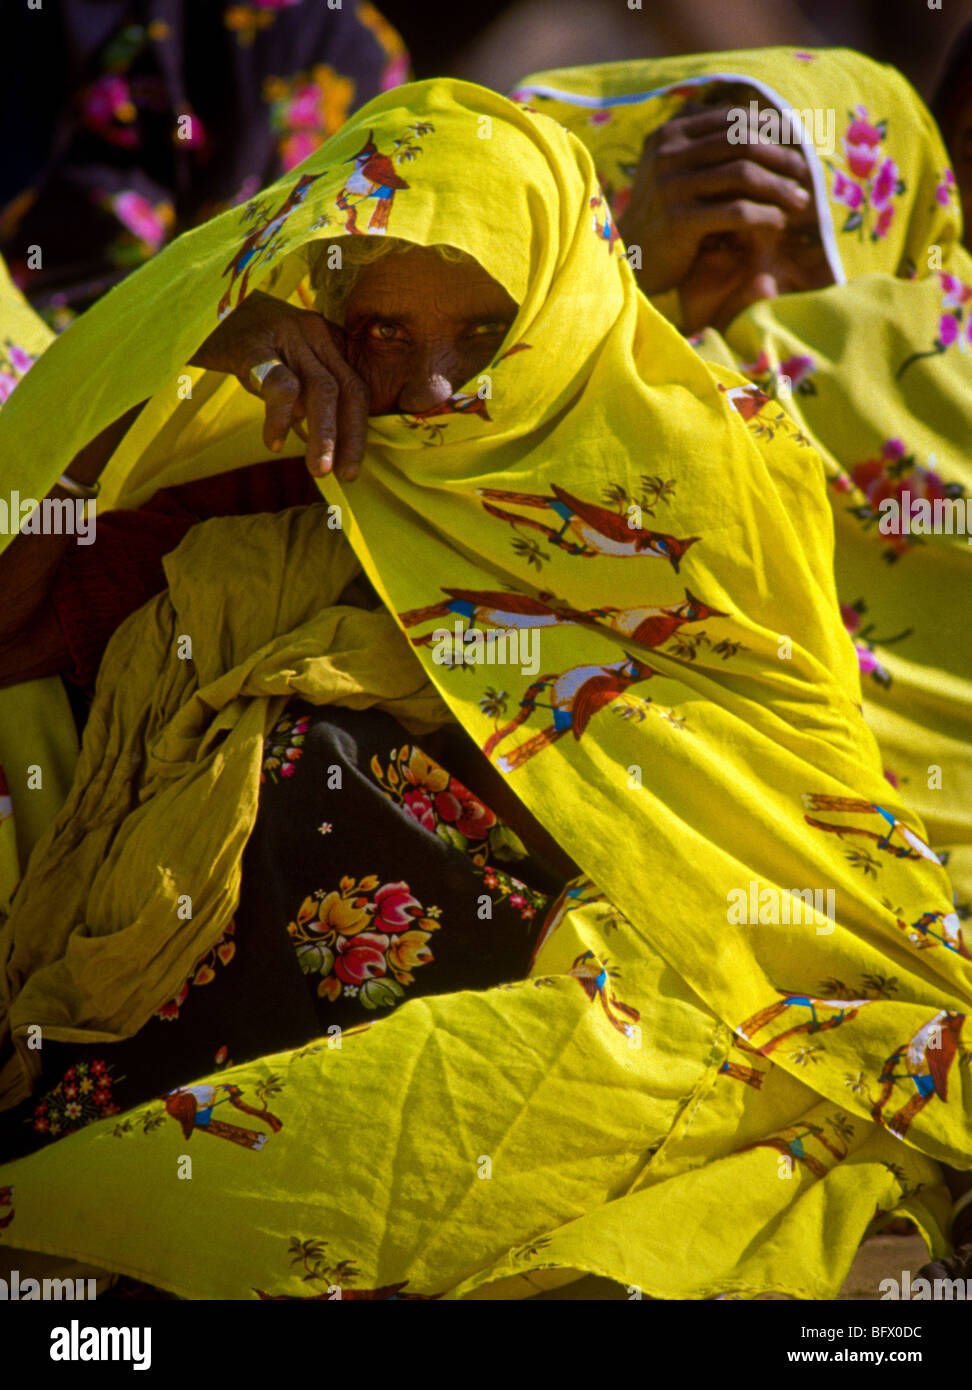 Nomadic Rajasthani women covered in colorful saris to protect them from the desert sun in Pushkar, India. Stock Photo